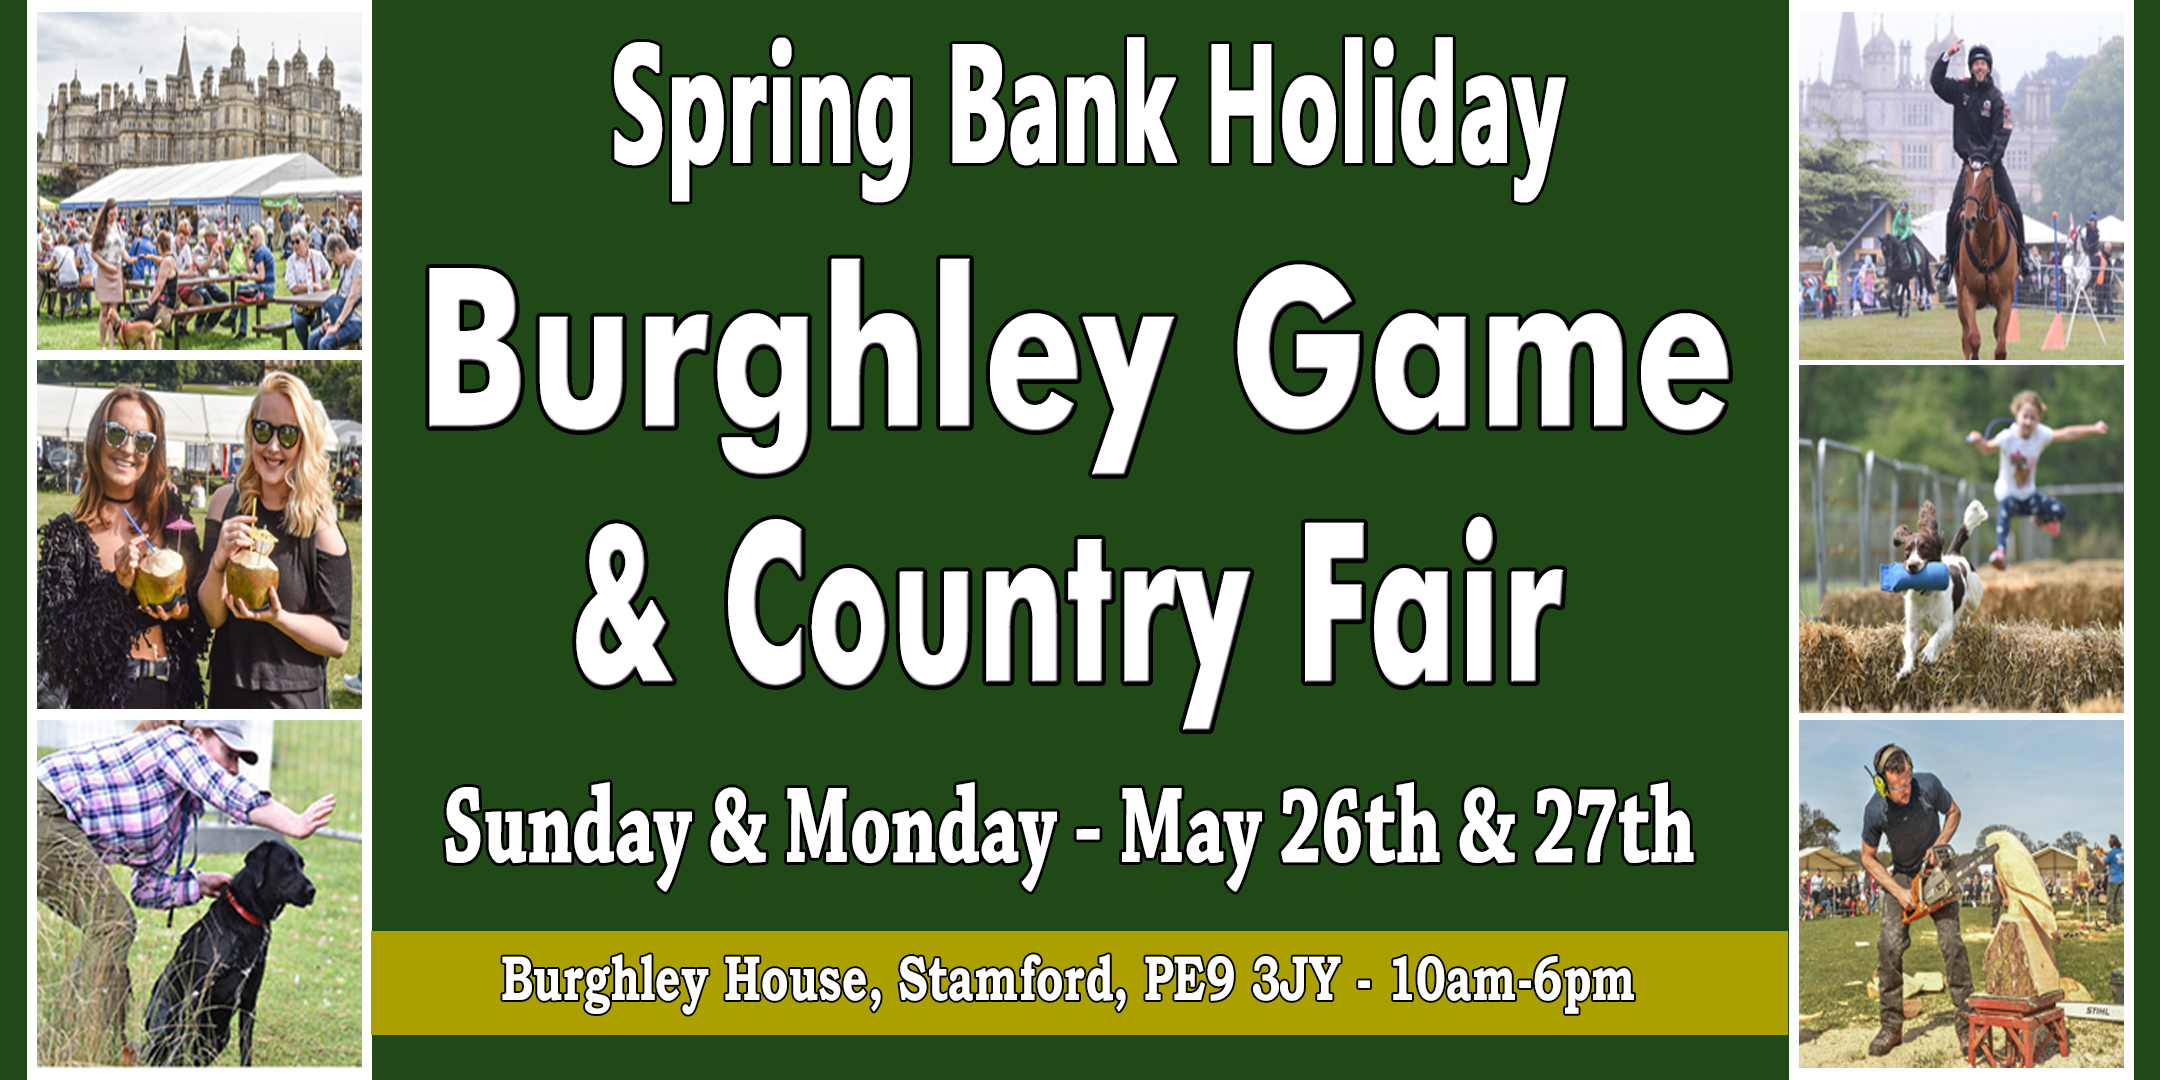 Burghley Game and Country Fair